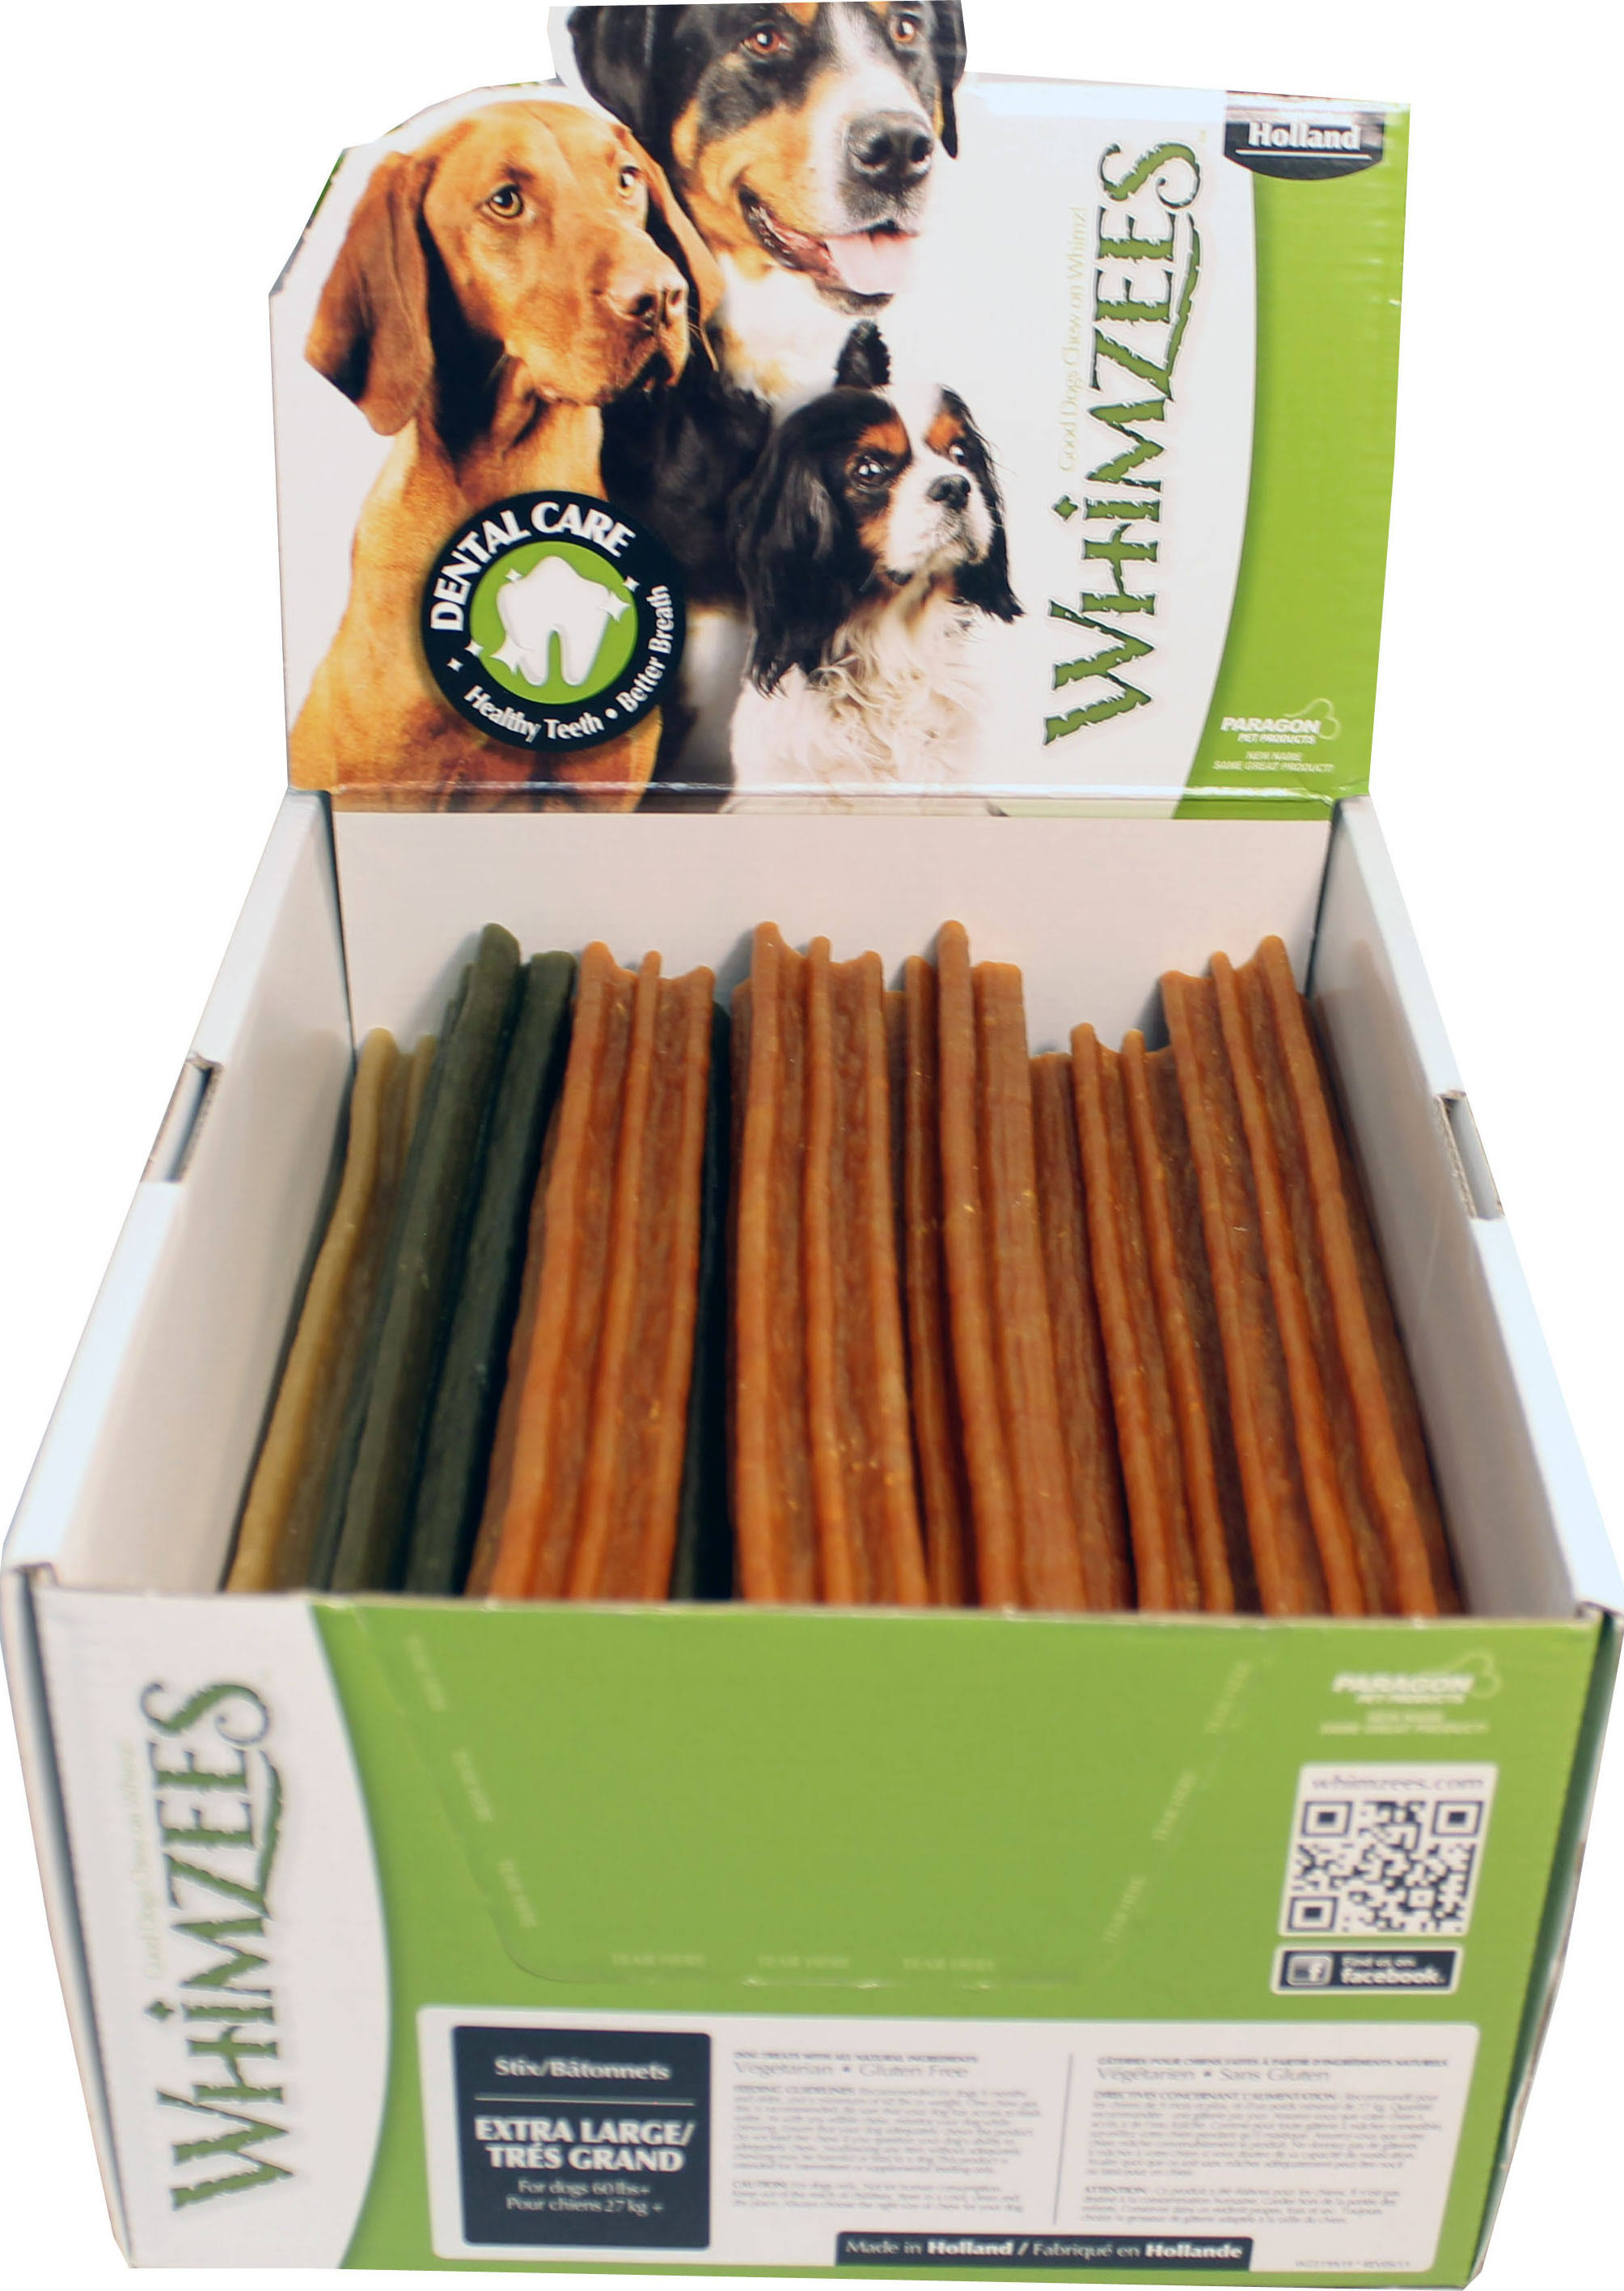 Paragon Whimzees Natural Dog Dental Care Chew Treats - X-Large, 4 Count